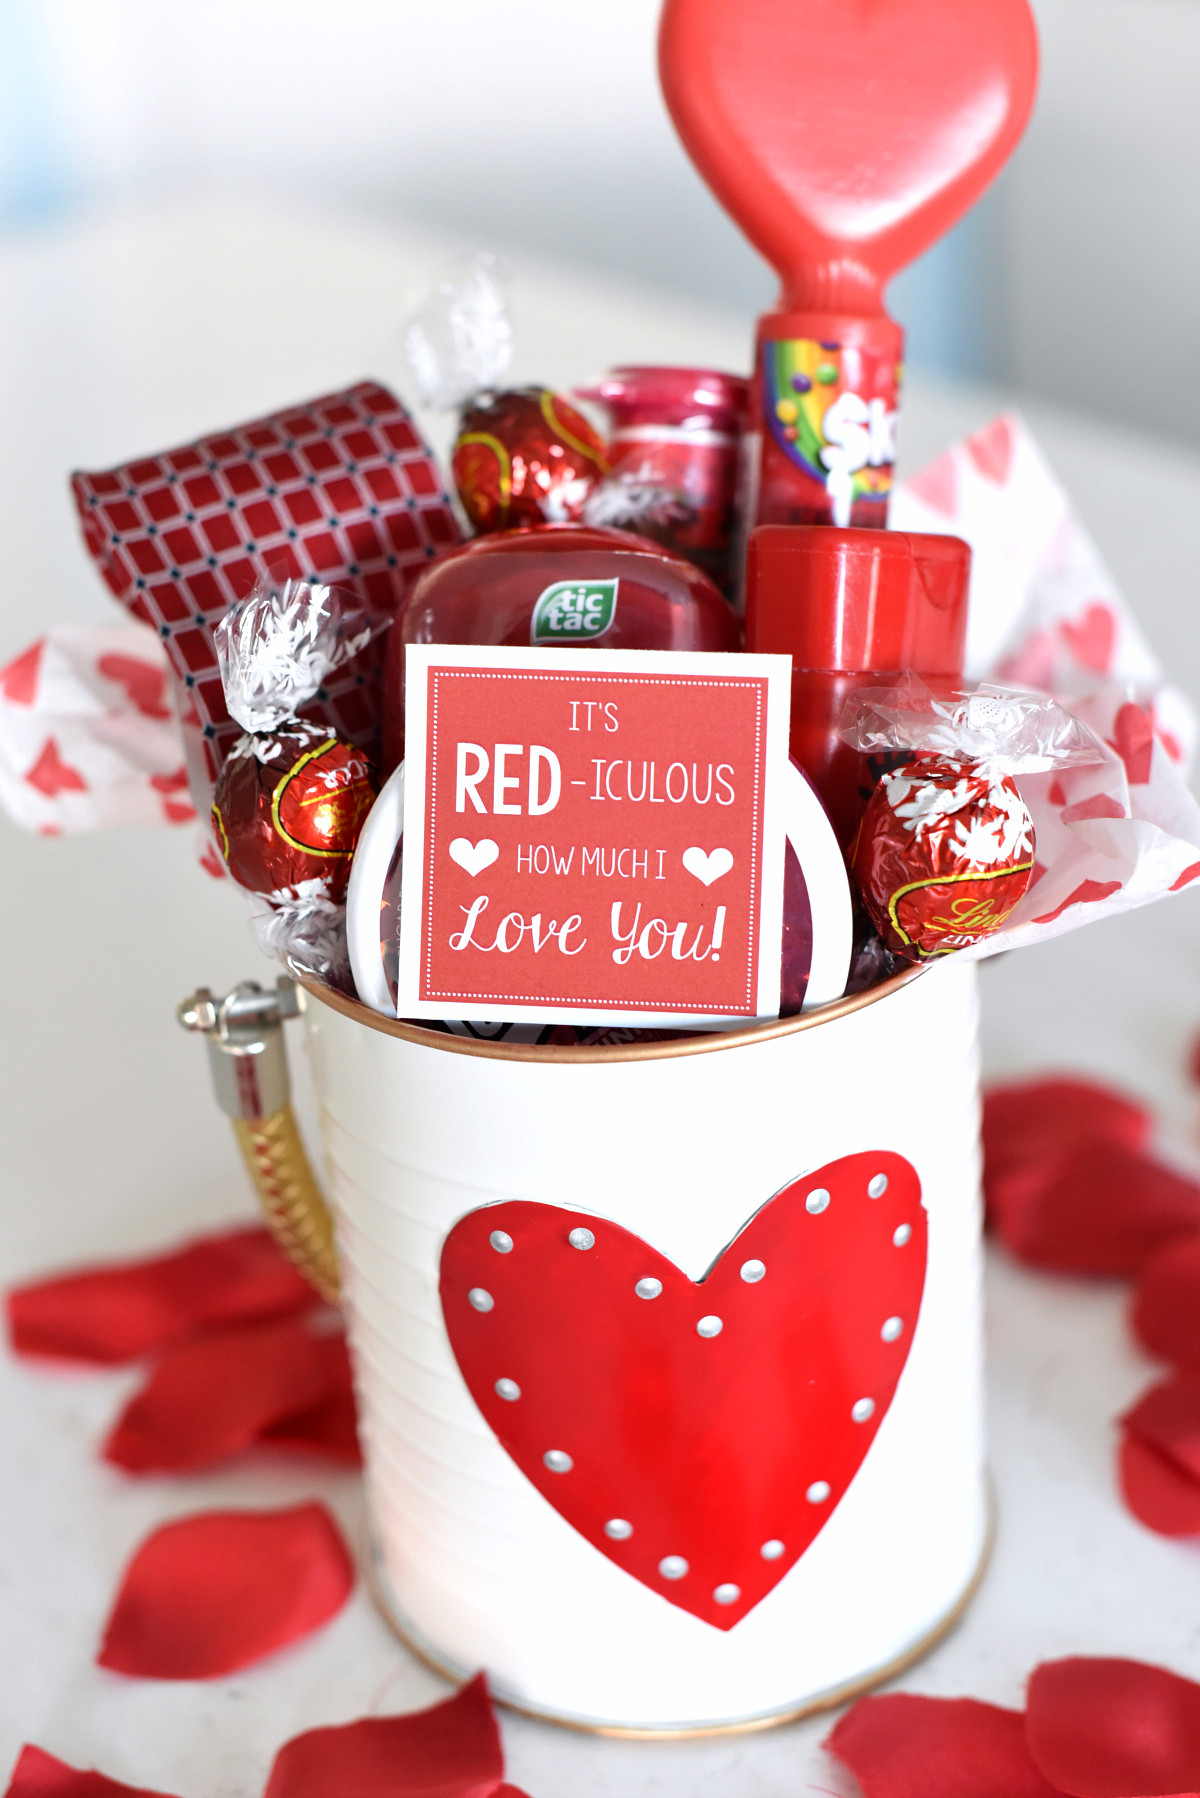 Man Valentines Day Gifts
 Cute Valentine s Day Gift Idea RED iculous Basket